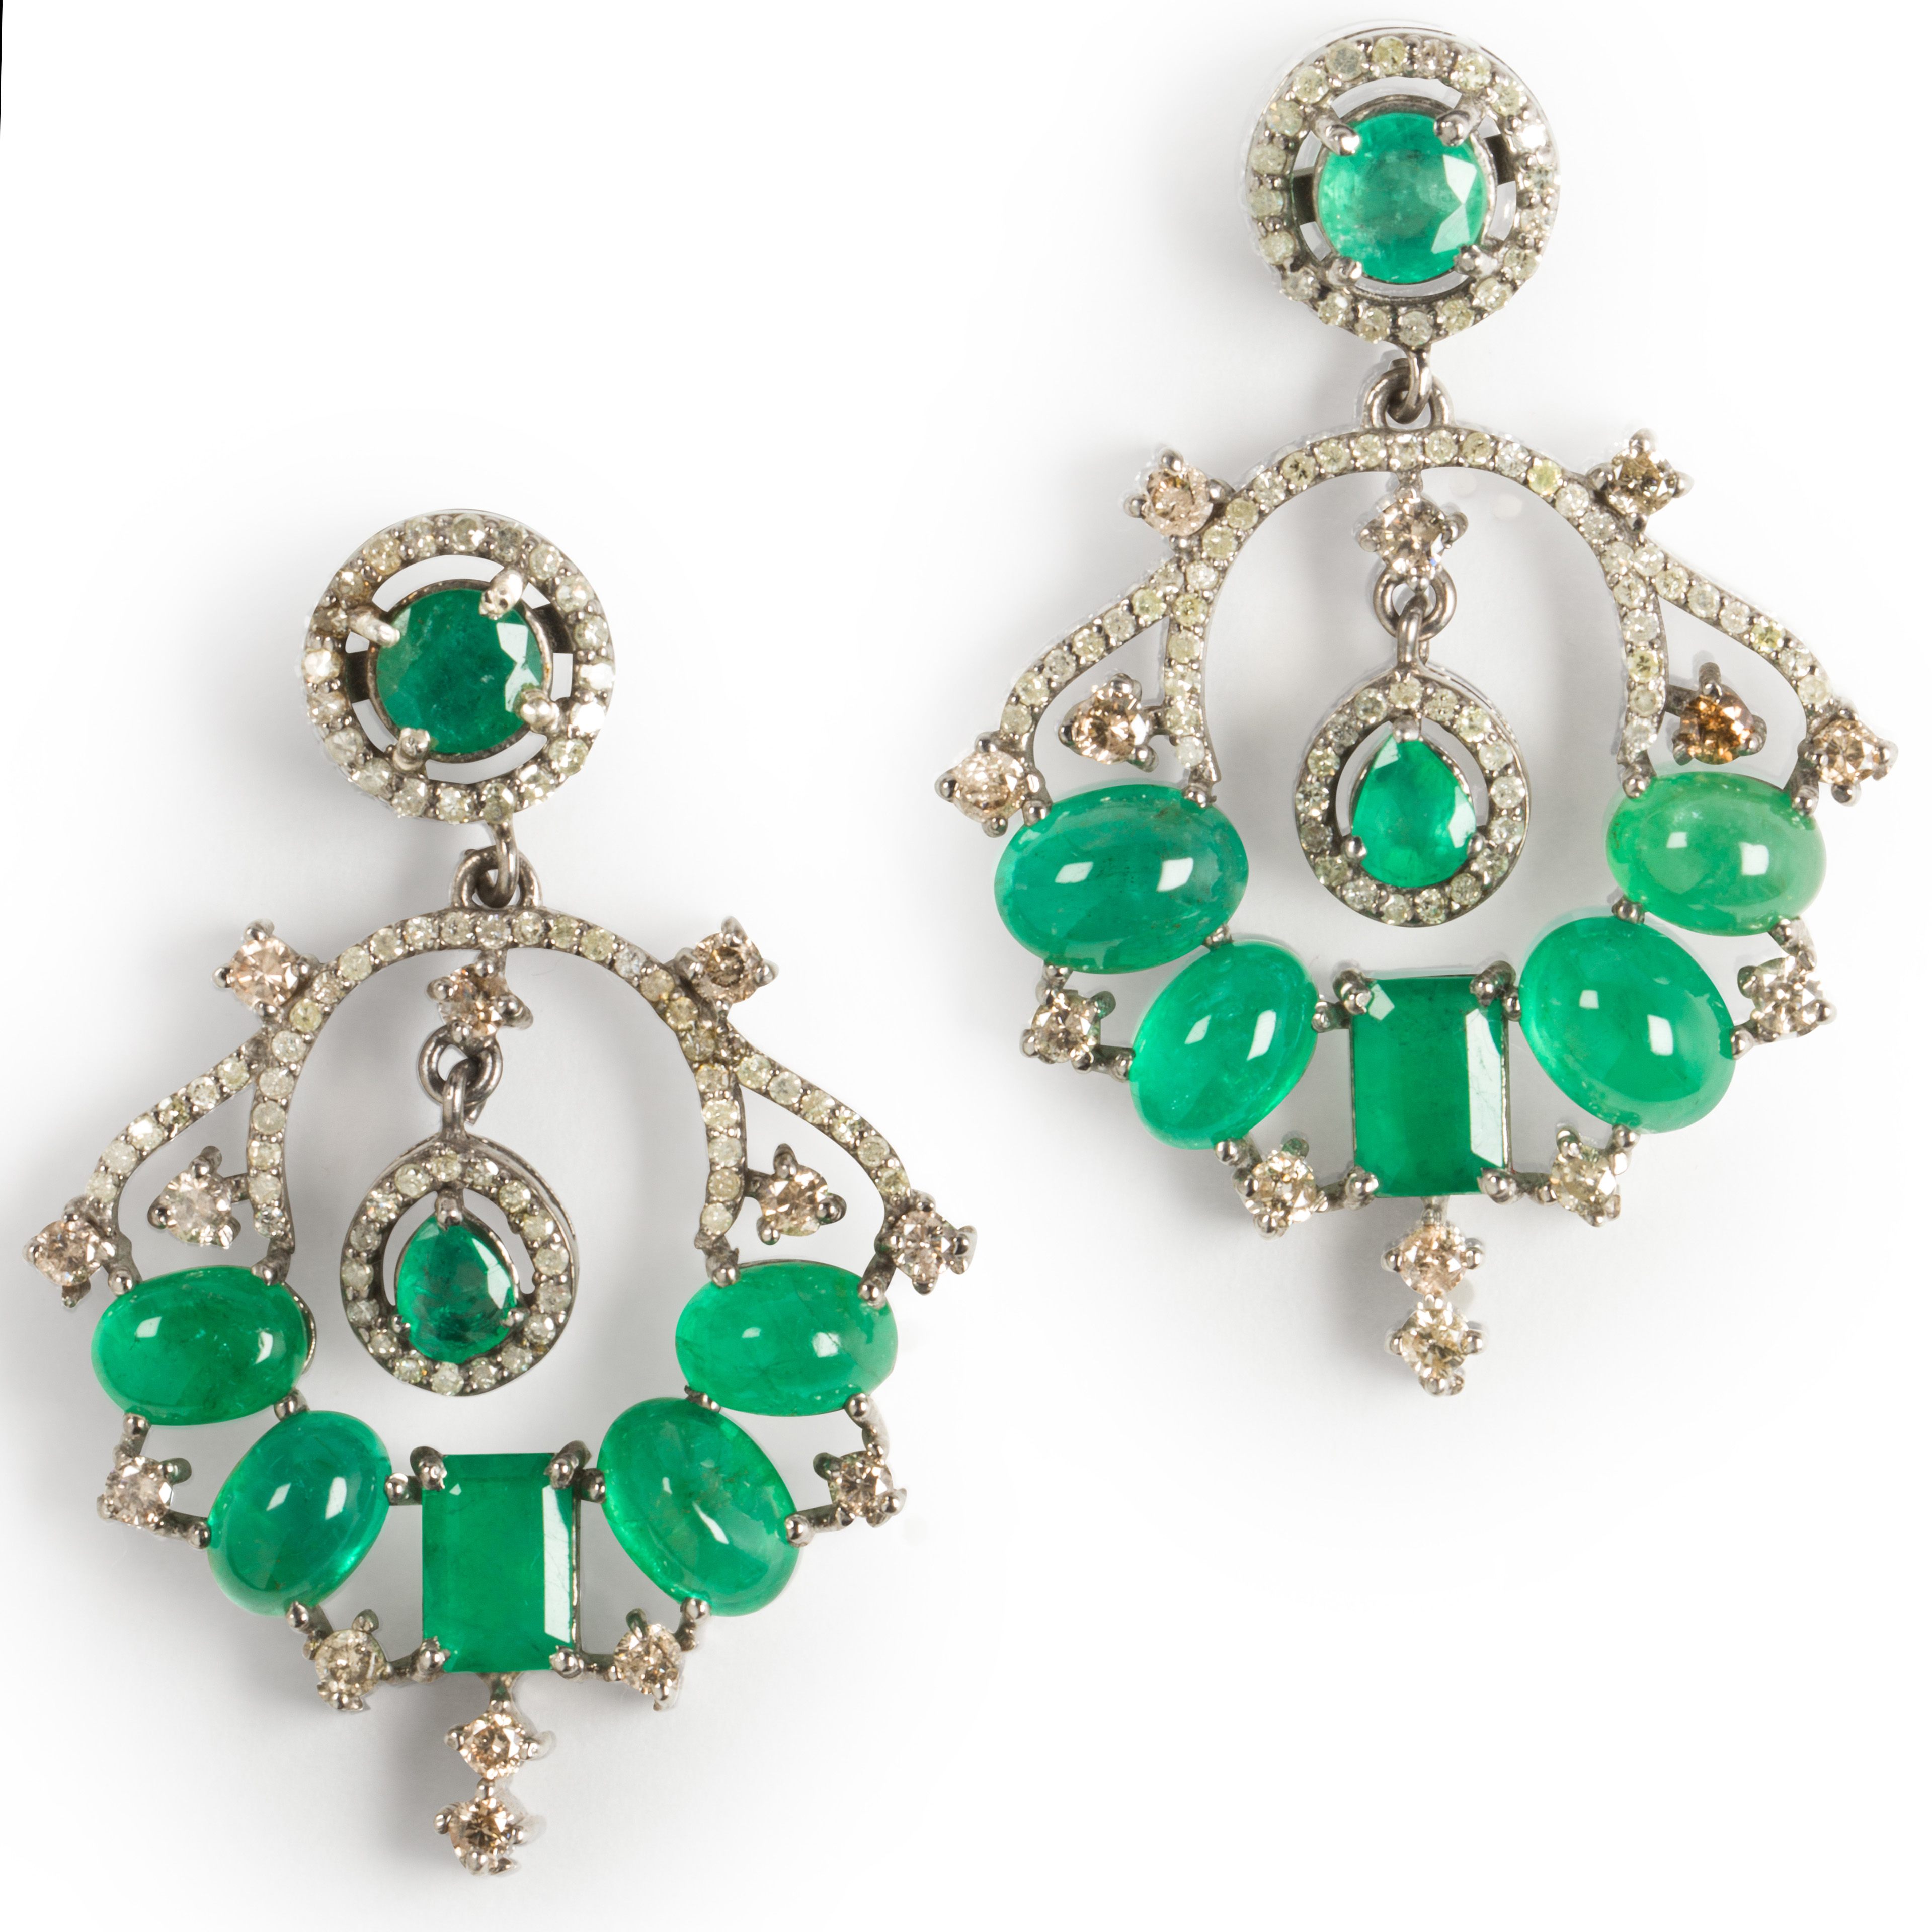 A PAIR OF EMERALD AND DIAMOND PENDANT